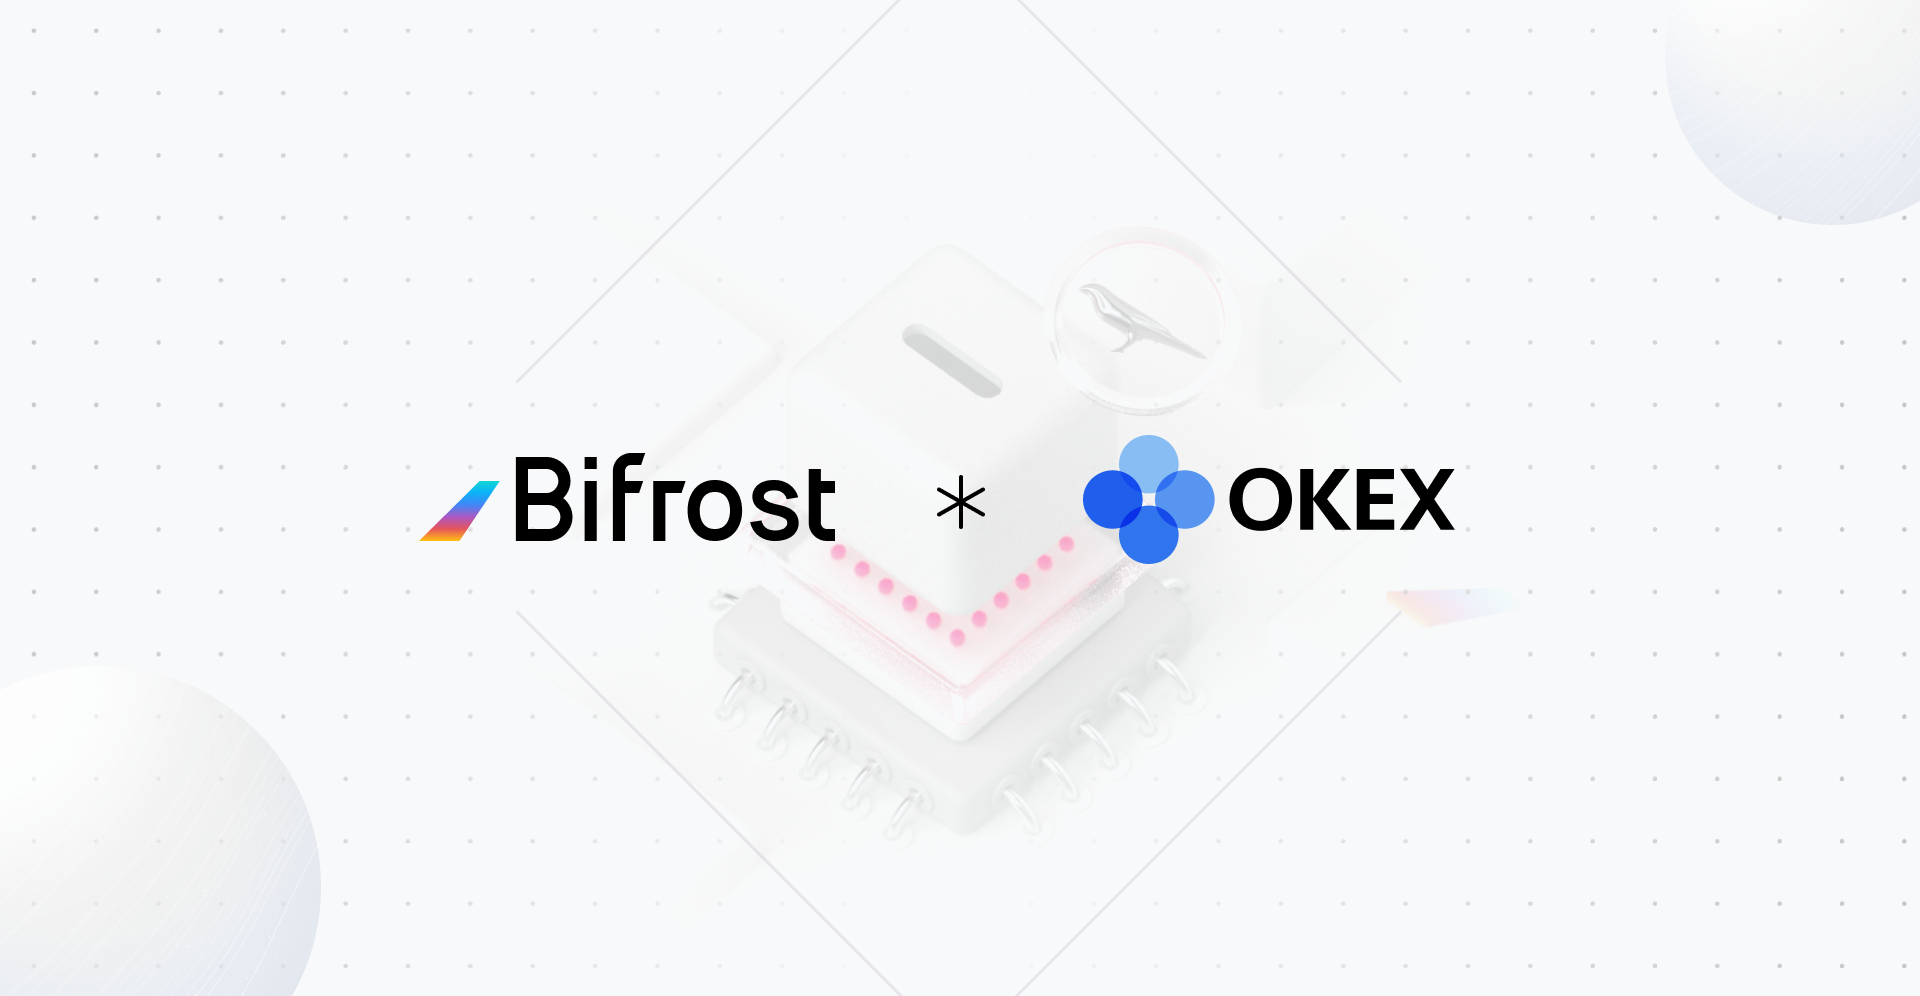 OKEx supports Bifrost Kusama Crowdloan through Early Bird Auction